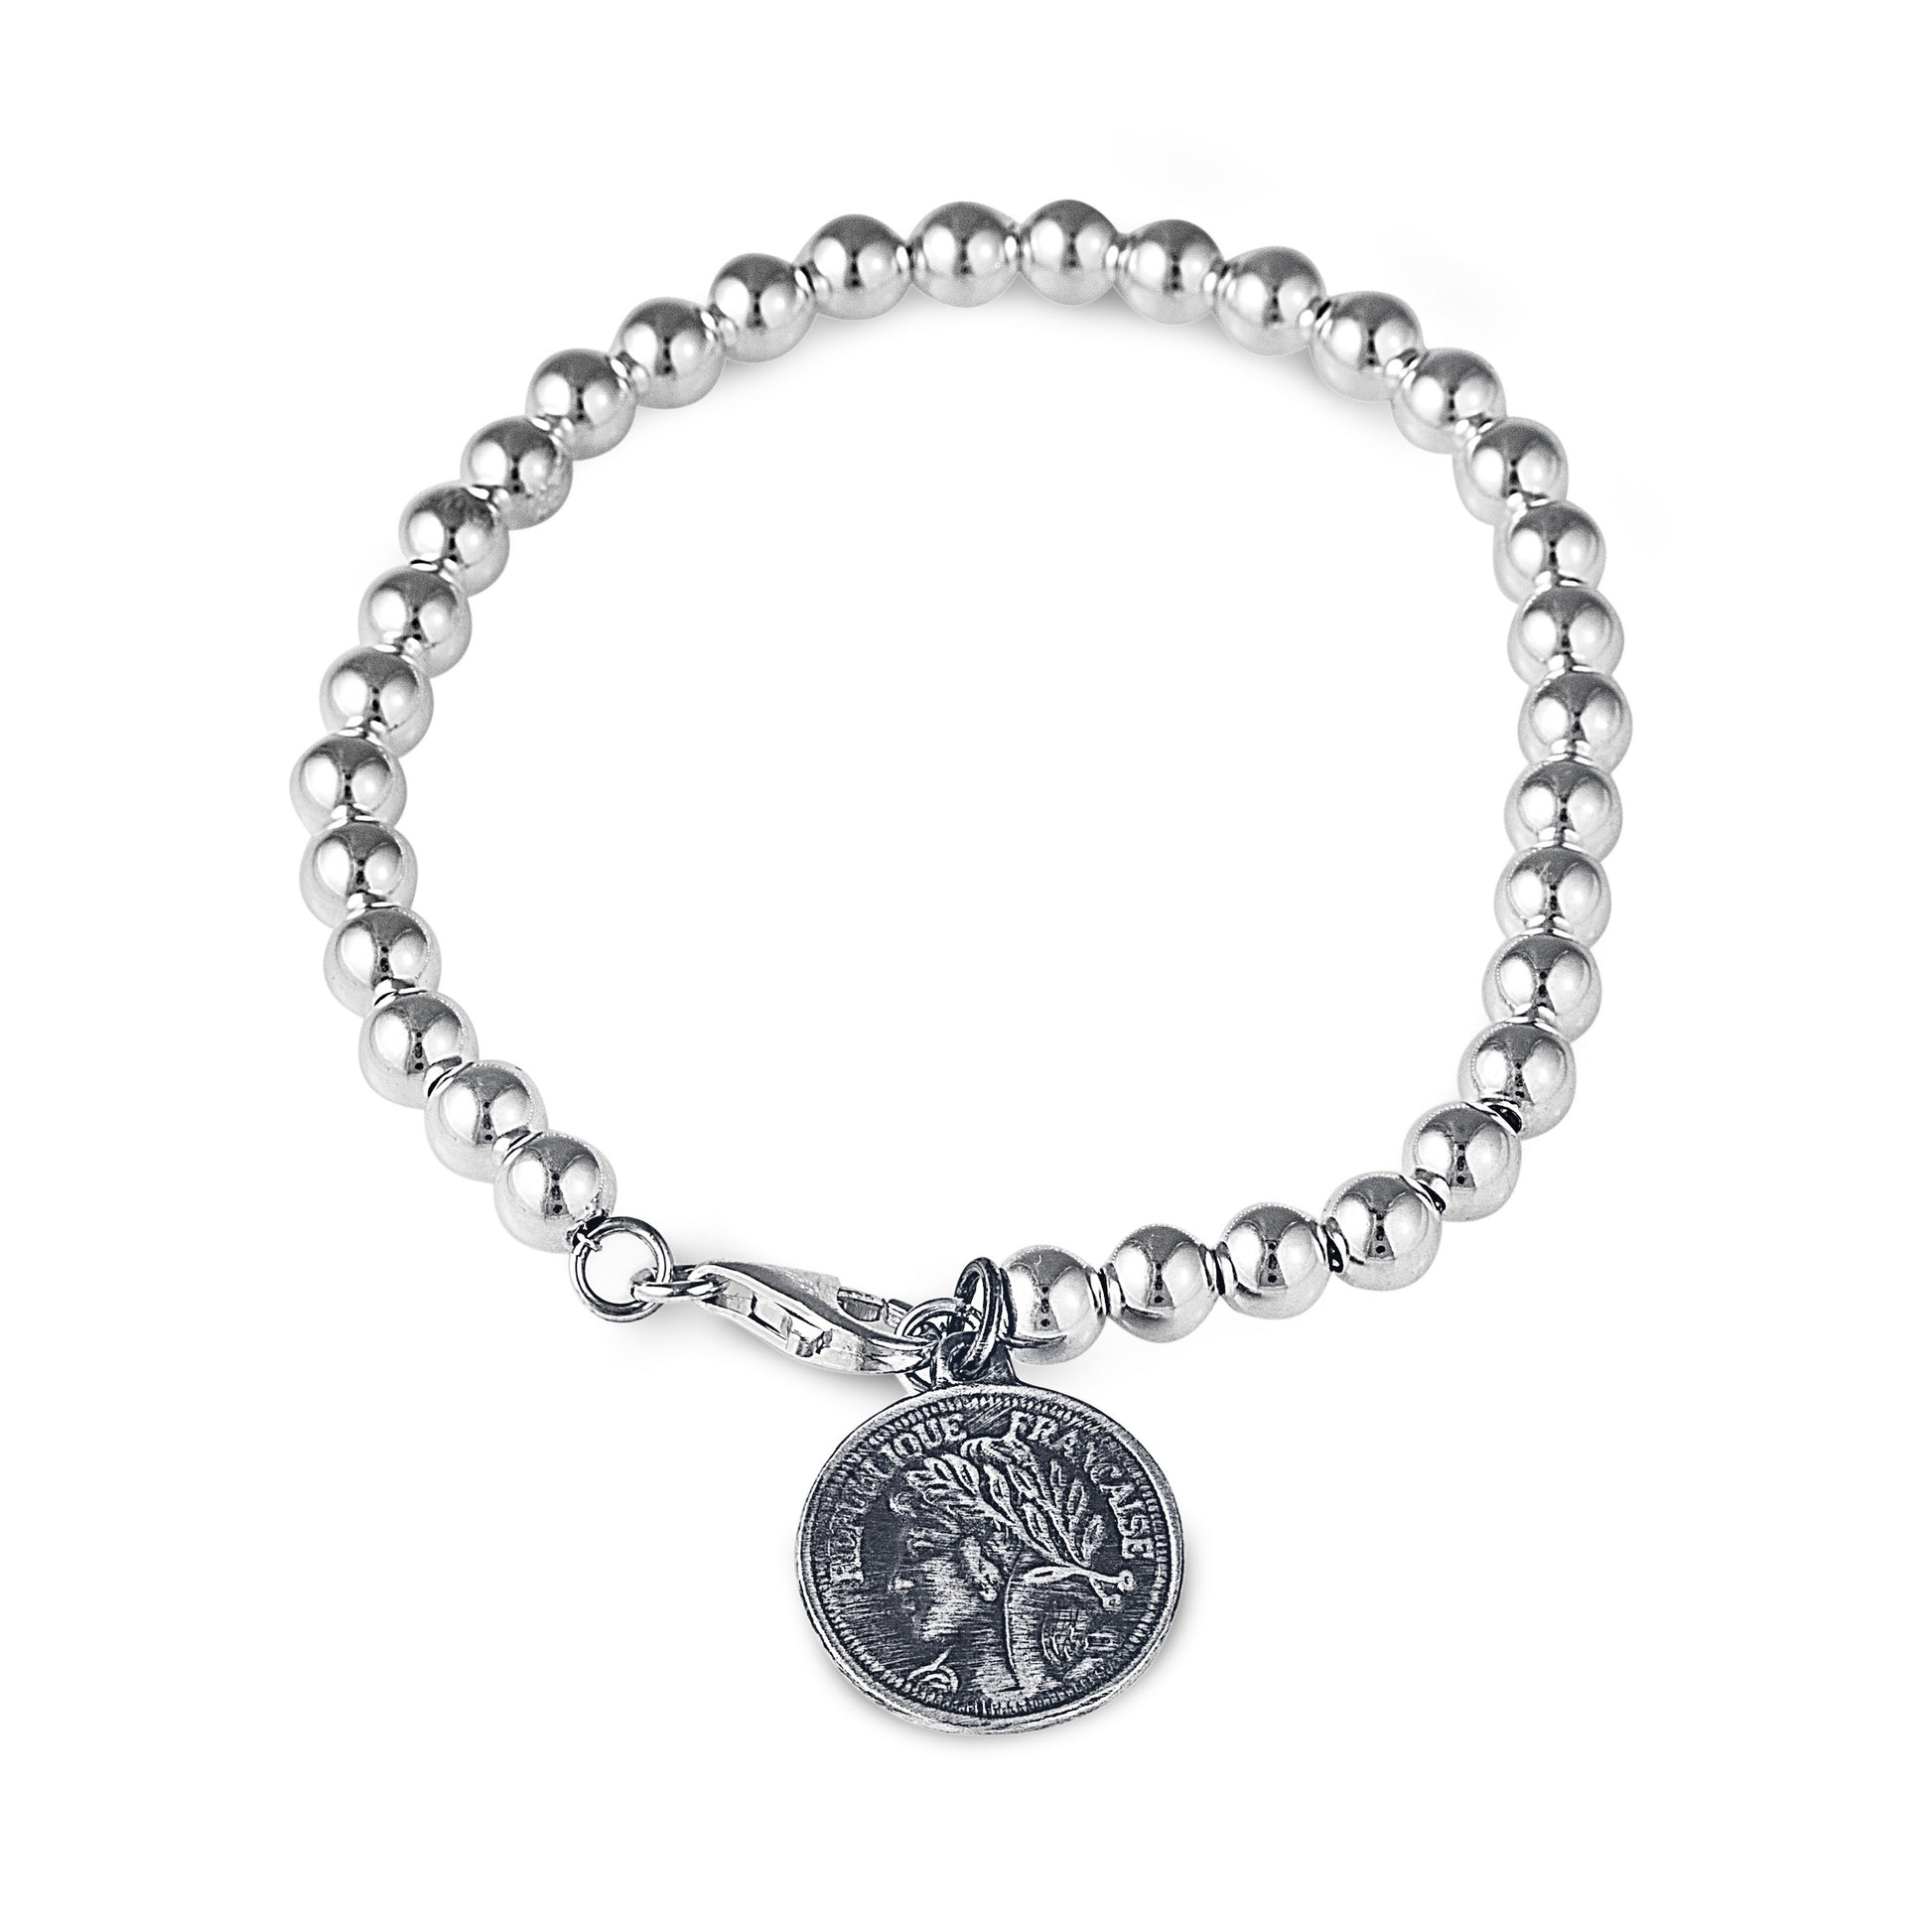 Diva Bracelet in 925 Sterling Silver - Ball Beads with Coin Charm. World wide shipping.